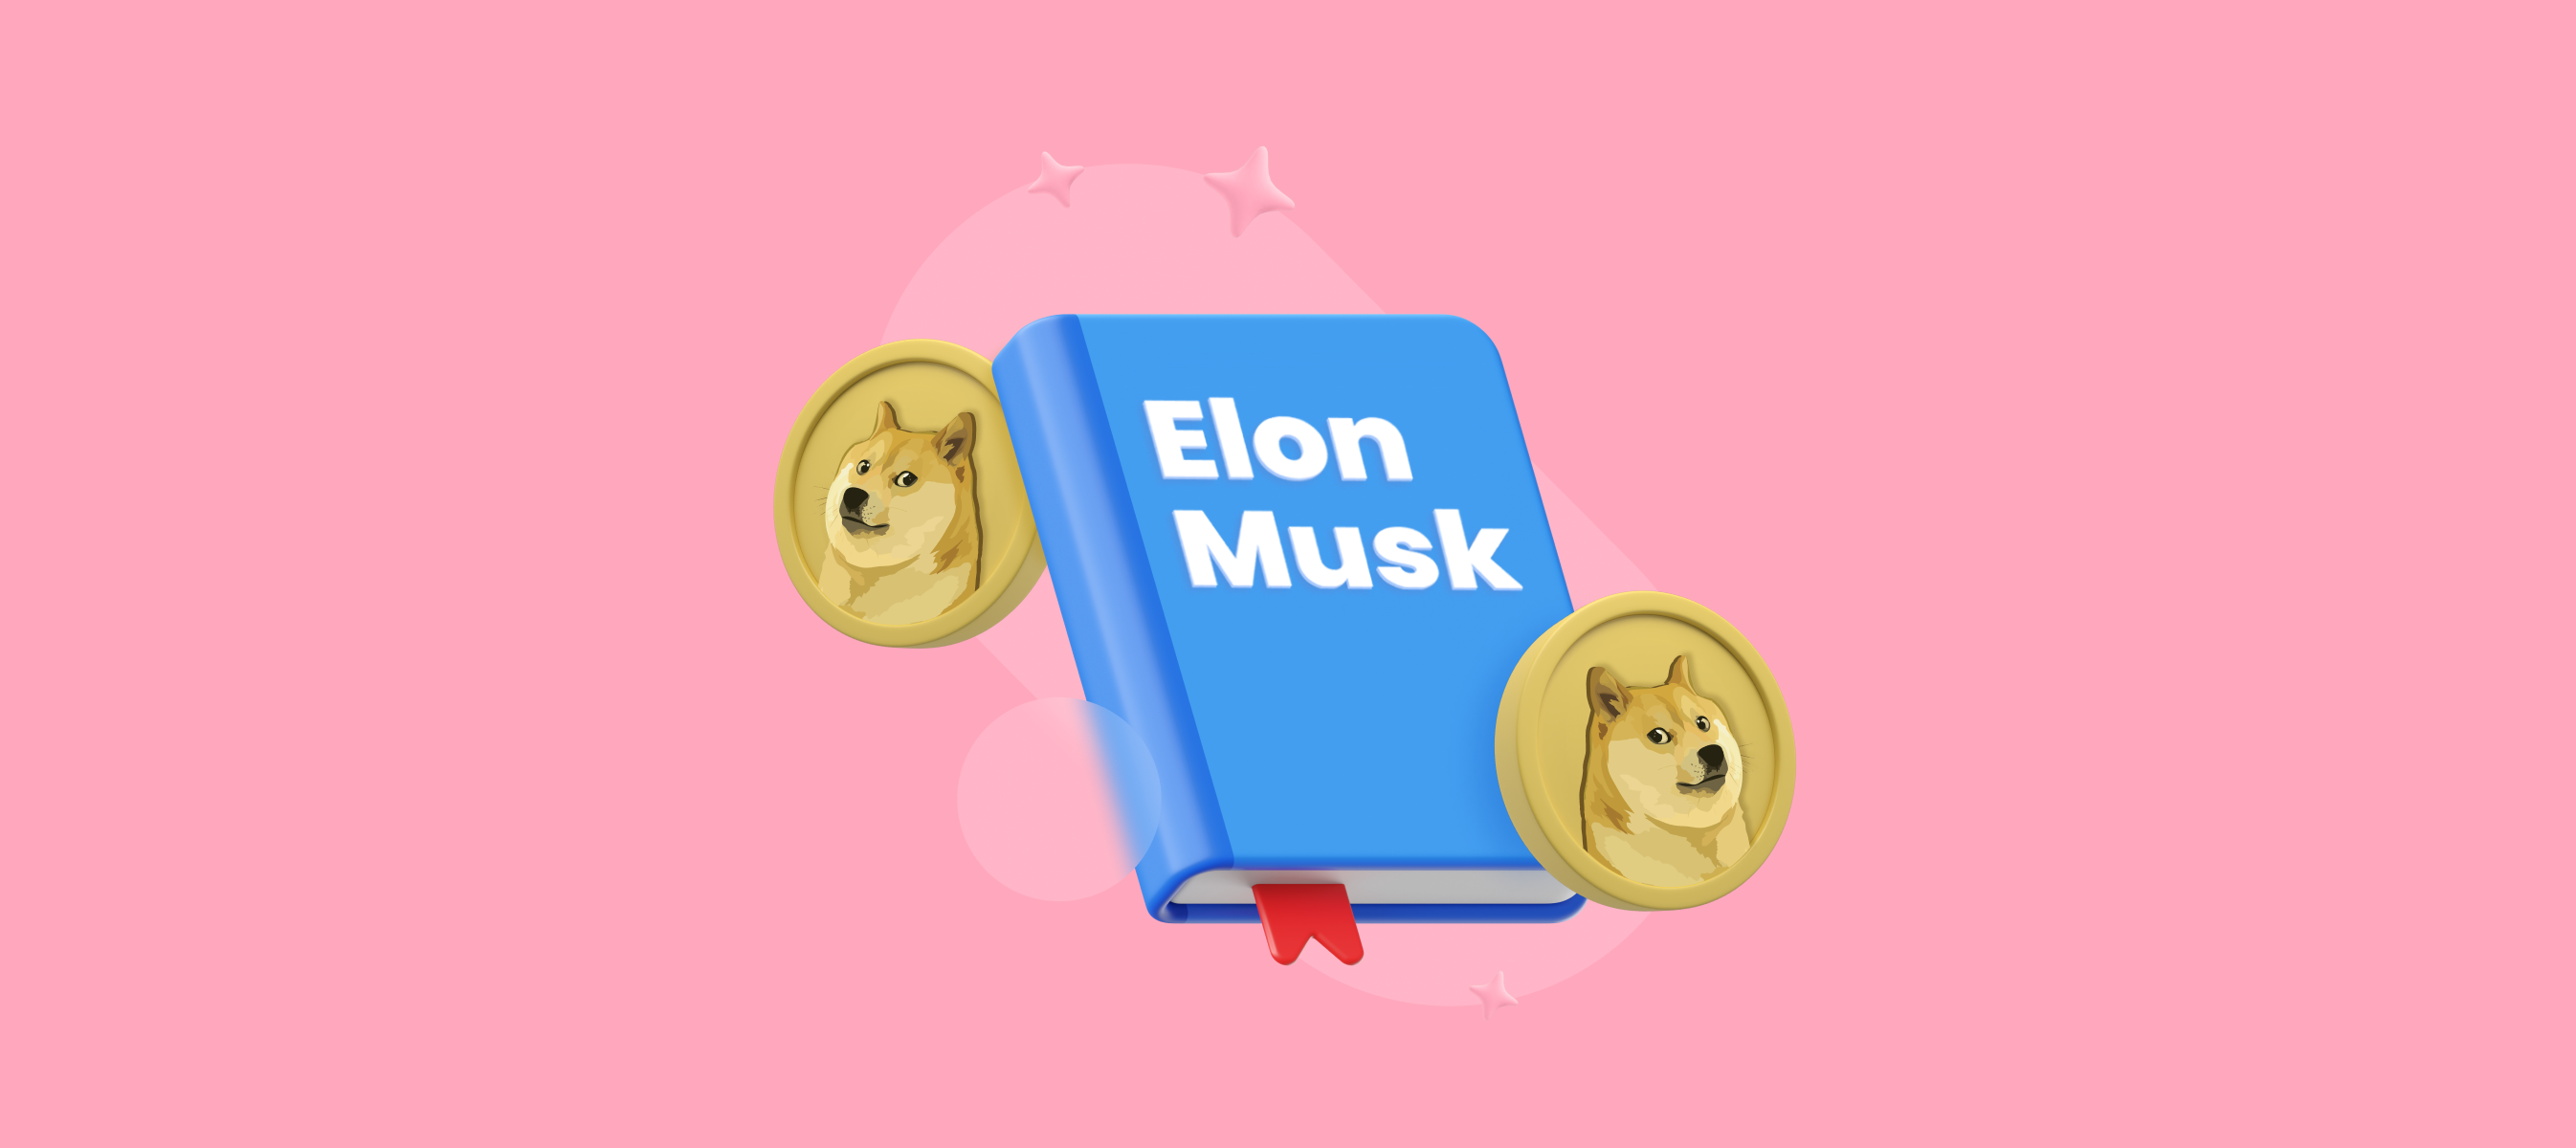 Elon Musk's Unveiled Secrets: A Biography and the Dogecoin Connection